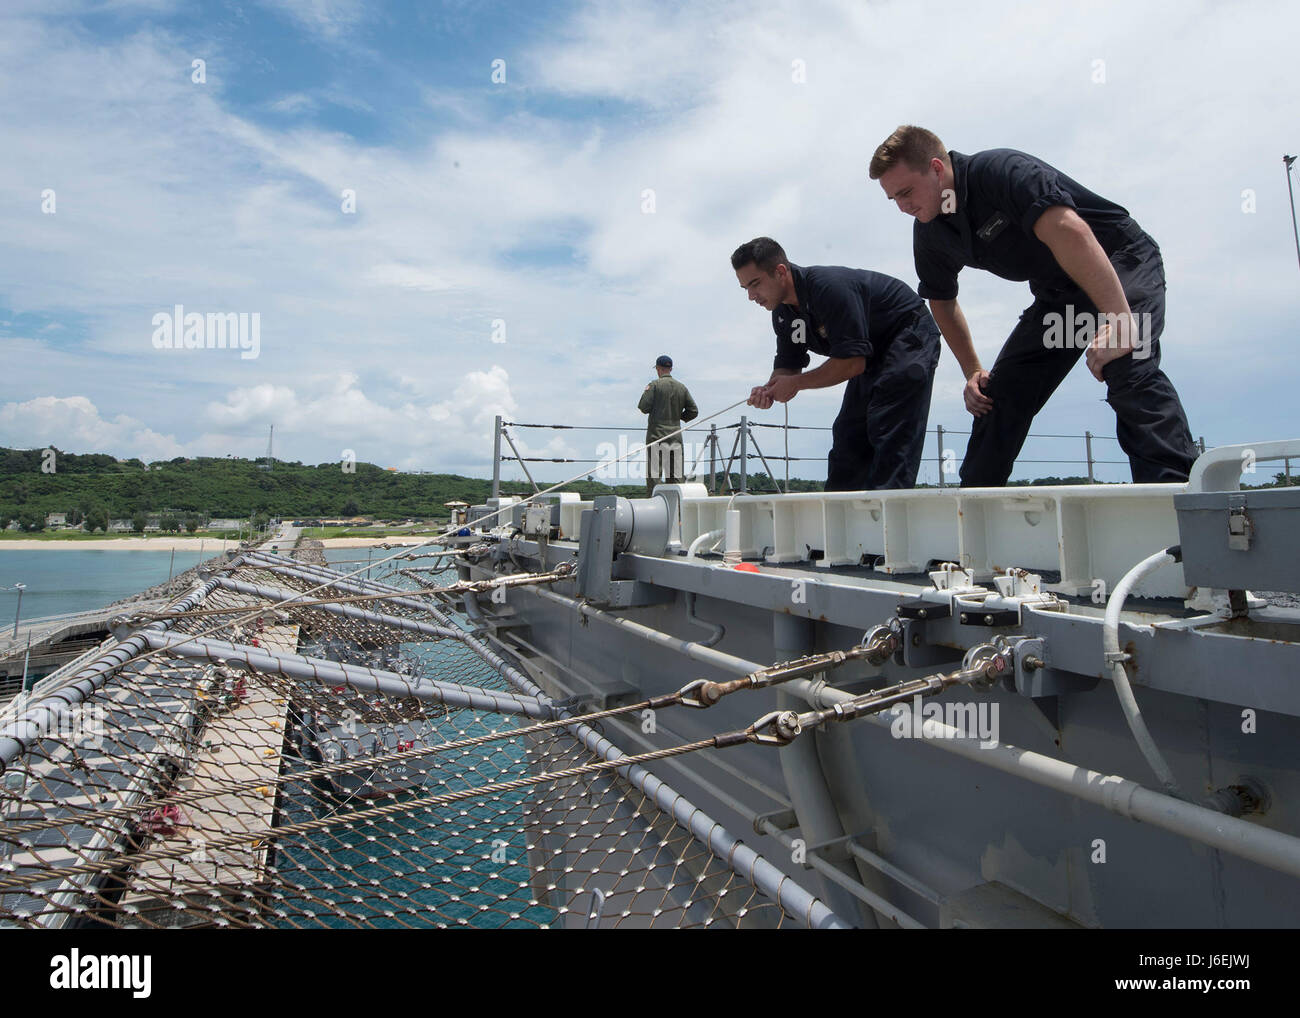 160817-N-NB544-025 OKINAWA, Japan (Aug. 17, 2016) Boatswain's Mate 3rd Class Christopher Schwall (left), from Chicago, mans a line as Seaman Allen Knight, from Streetman, Texas, observes line handlers on the pier as amphibious assault ship USS Bonhomme Richard (LHD 6) arrives at White Beach Naval Facility in Okinawa, Japan. During the visit, Bonhomme Richard will embark Marines of the 31st Marine Expeditionary Unit (MEU). Bonhomme Richard, flagship of the Bonhomme Richard Expeditionary Strike Group, is operating in the U.S. 7th Fleet area of operations in support of security and stability in t Stock Photo